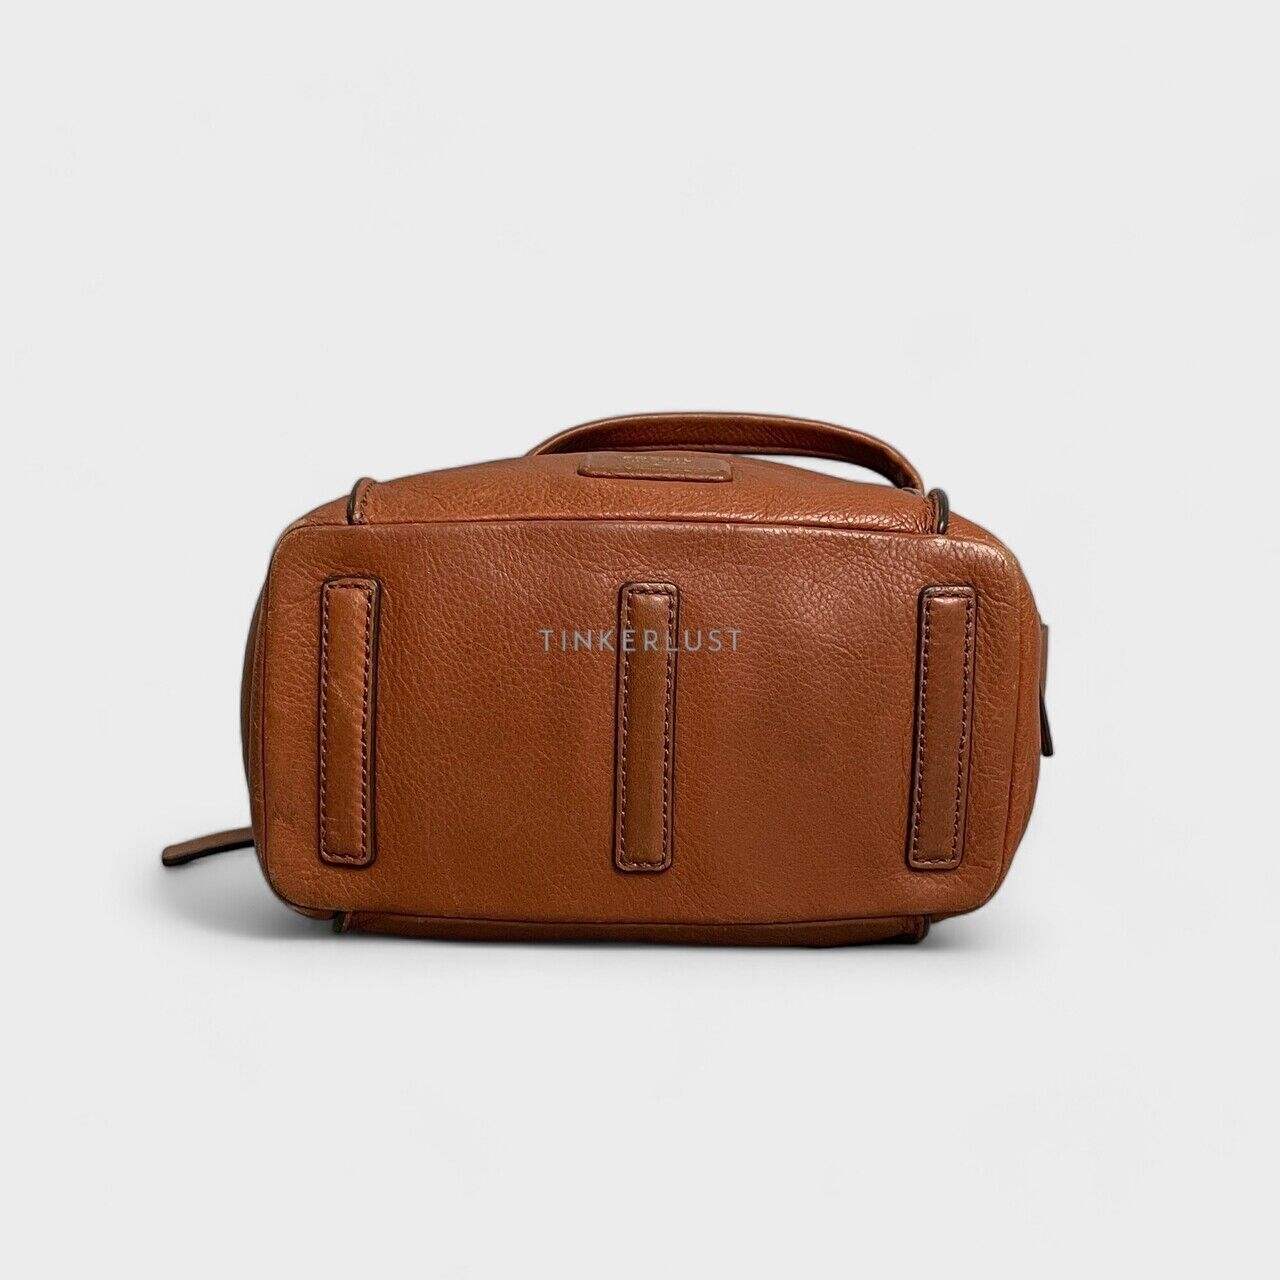 Fossil Brown Emerson Satchel